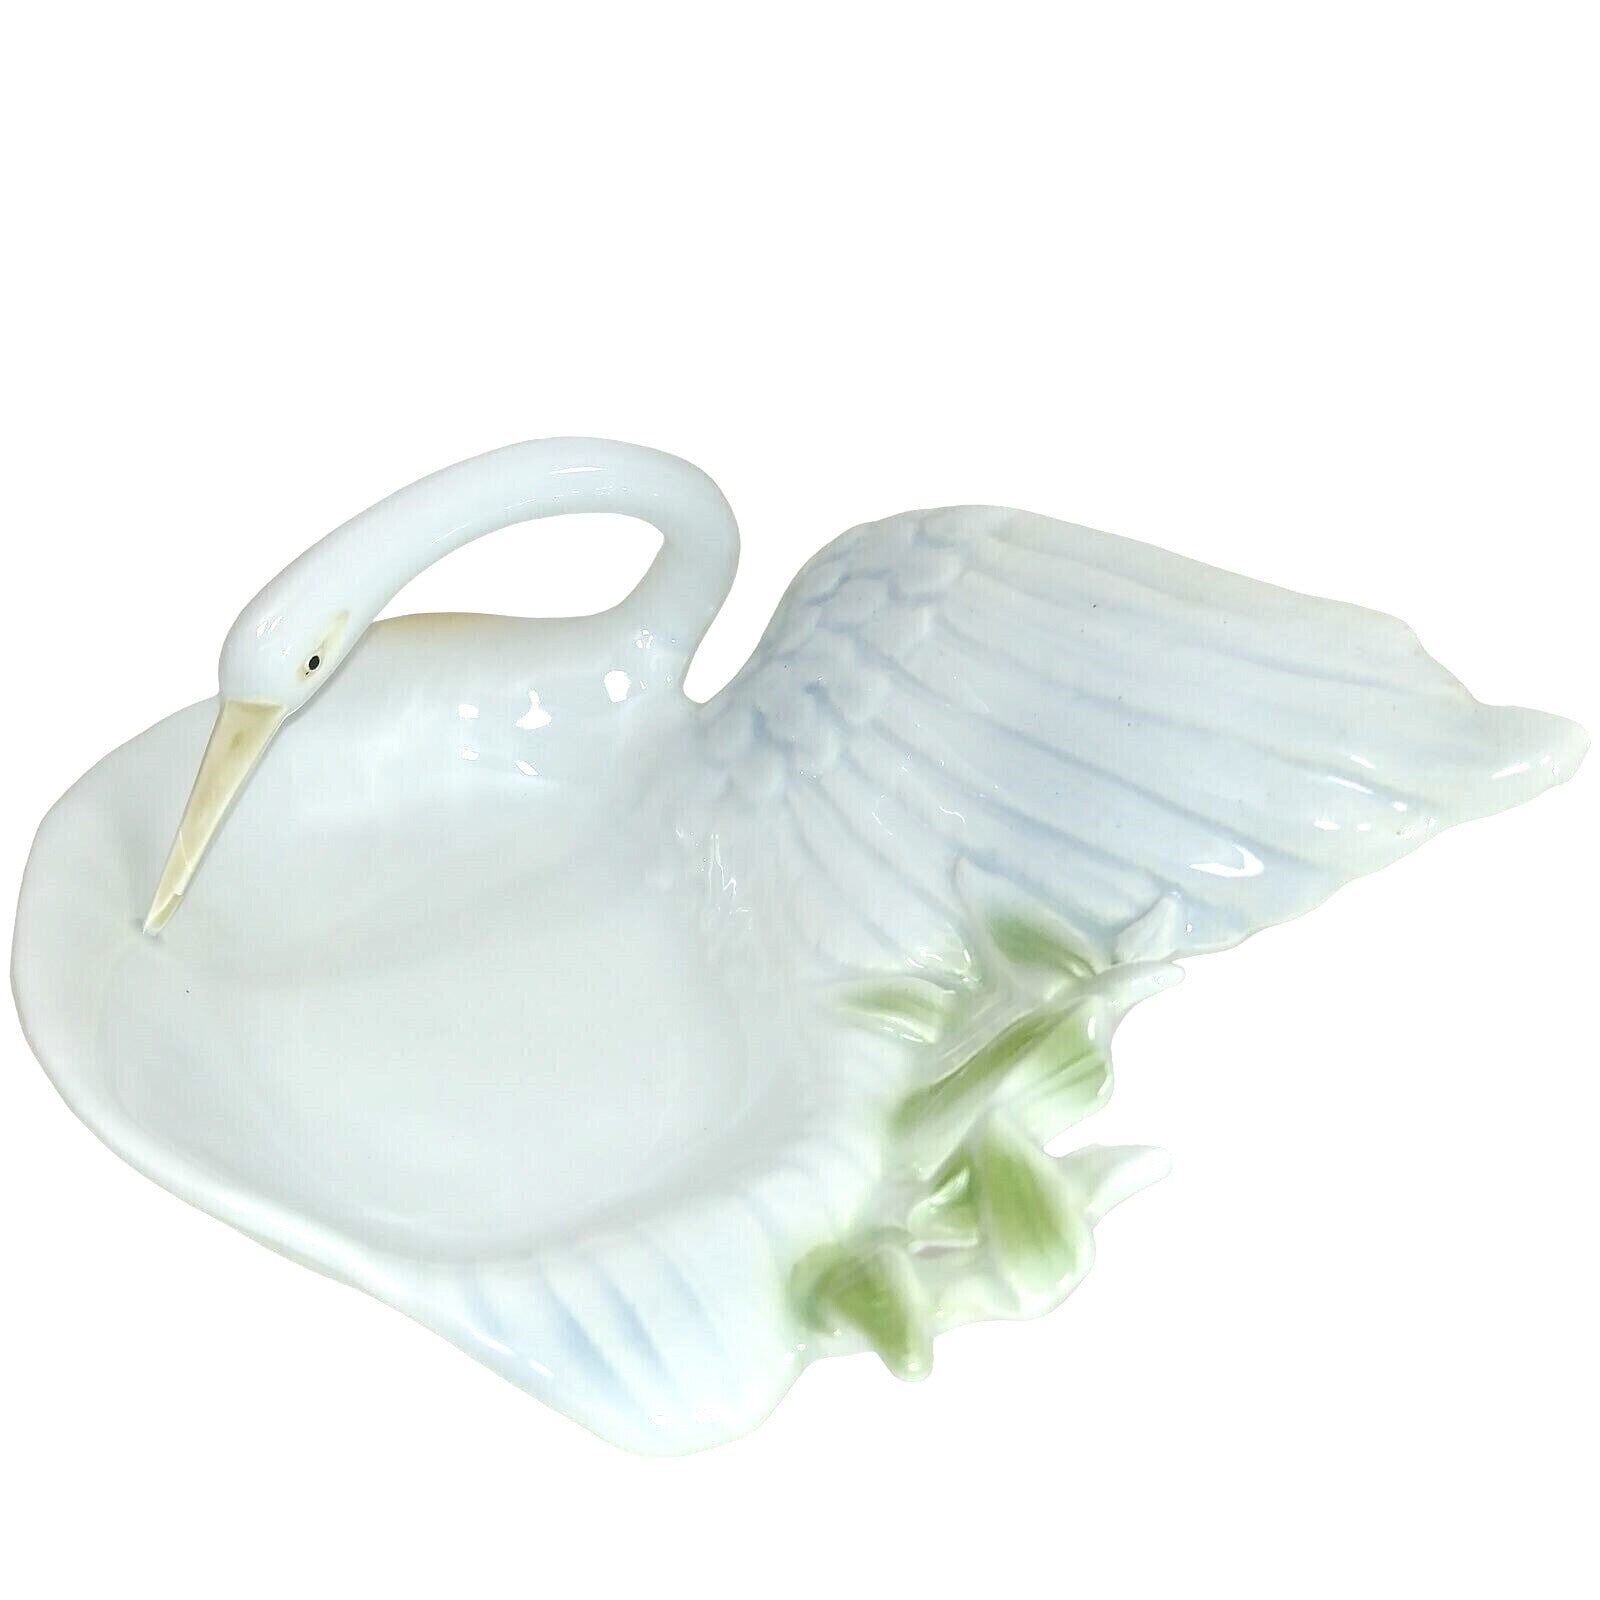 FF Fitz and Floyd Swan Soap or Candy Dish Original Decal